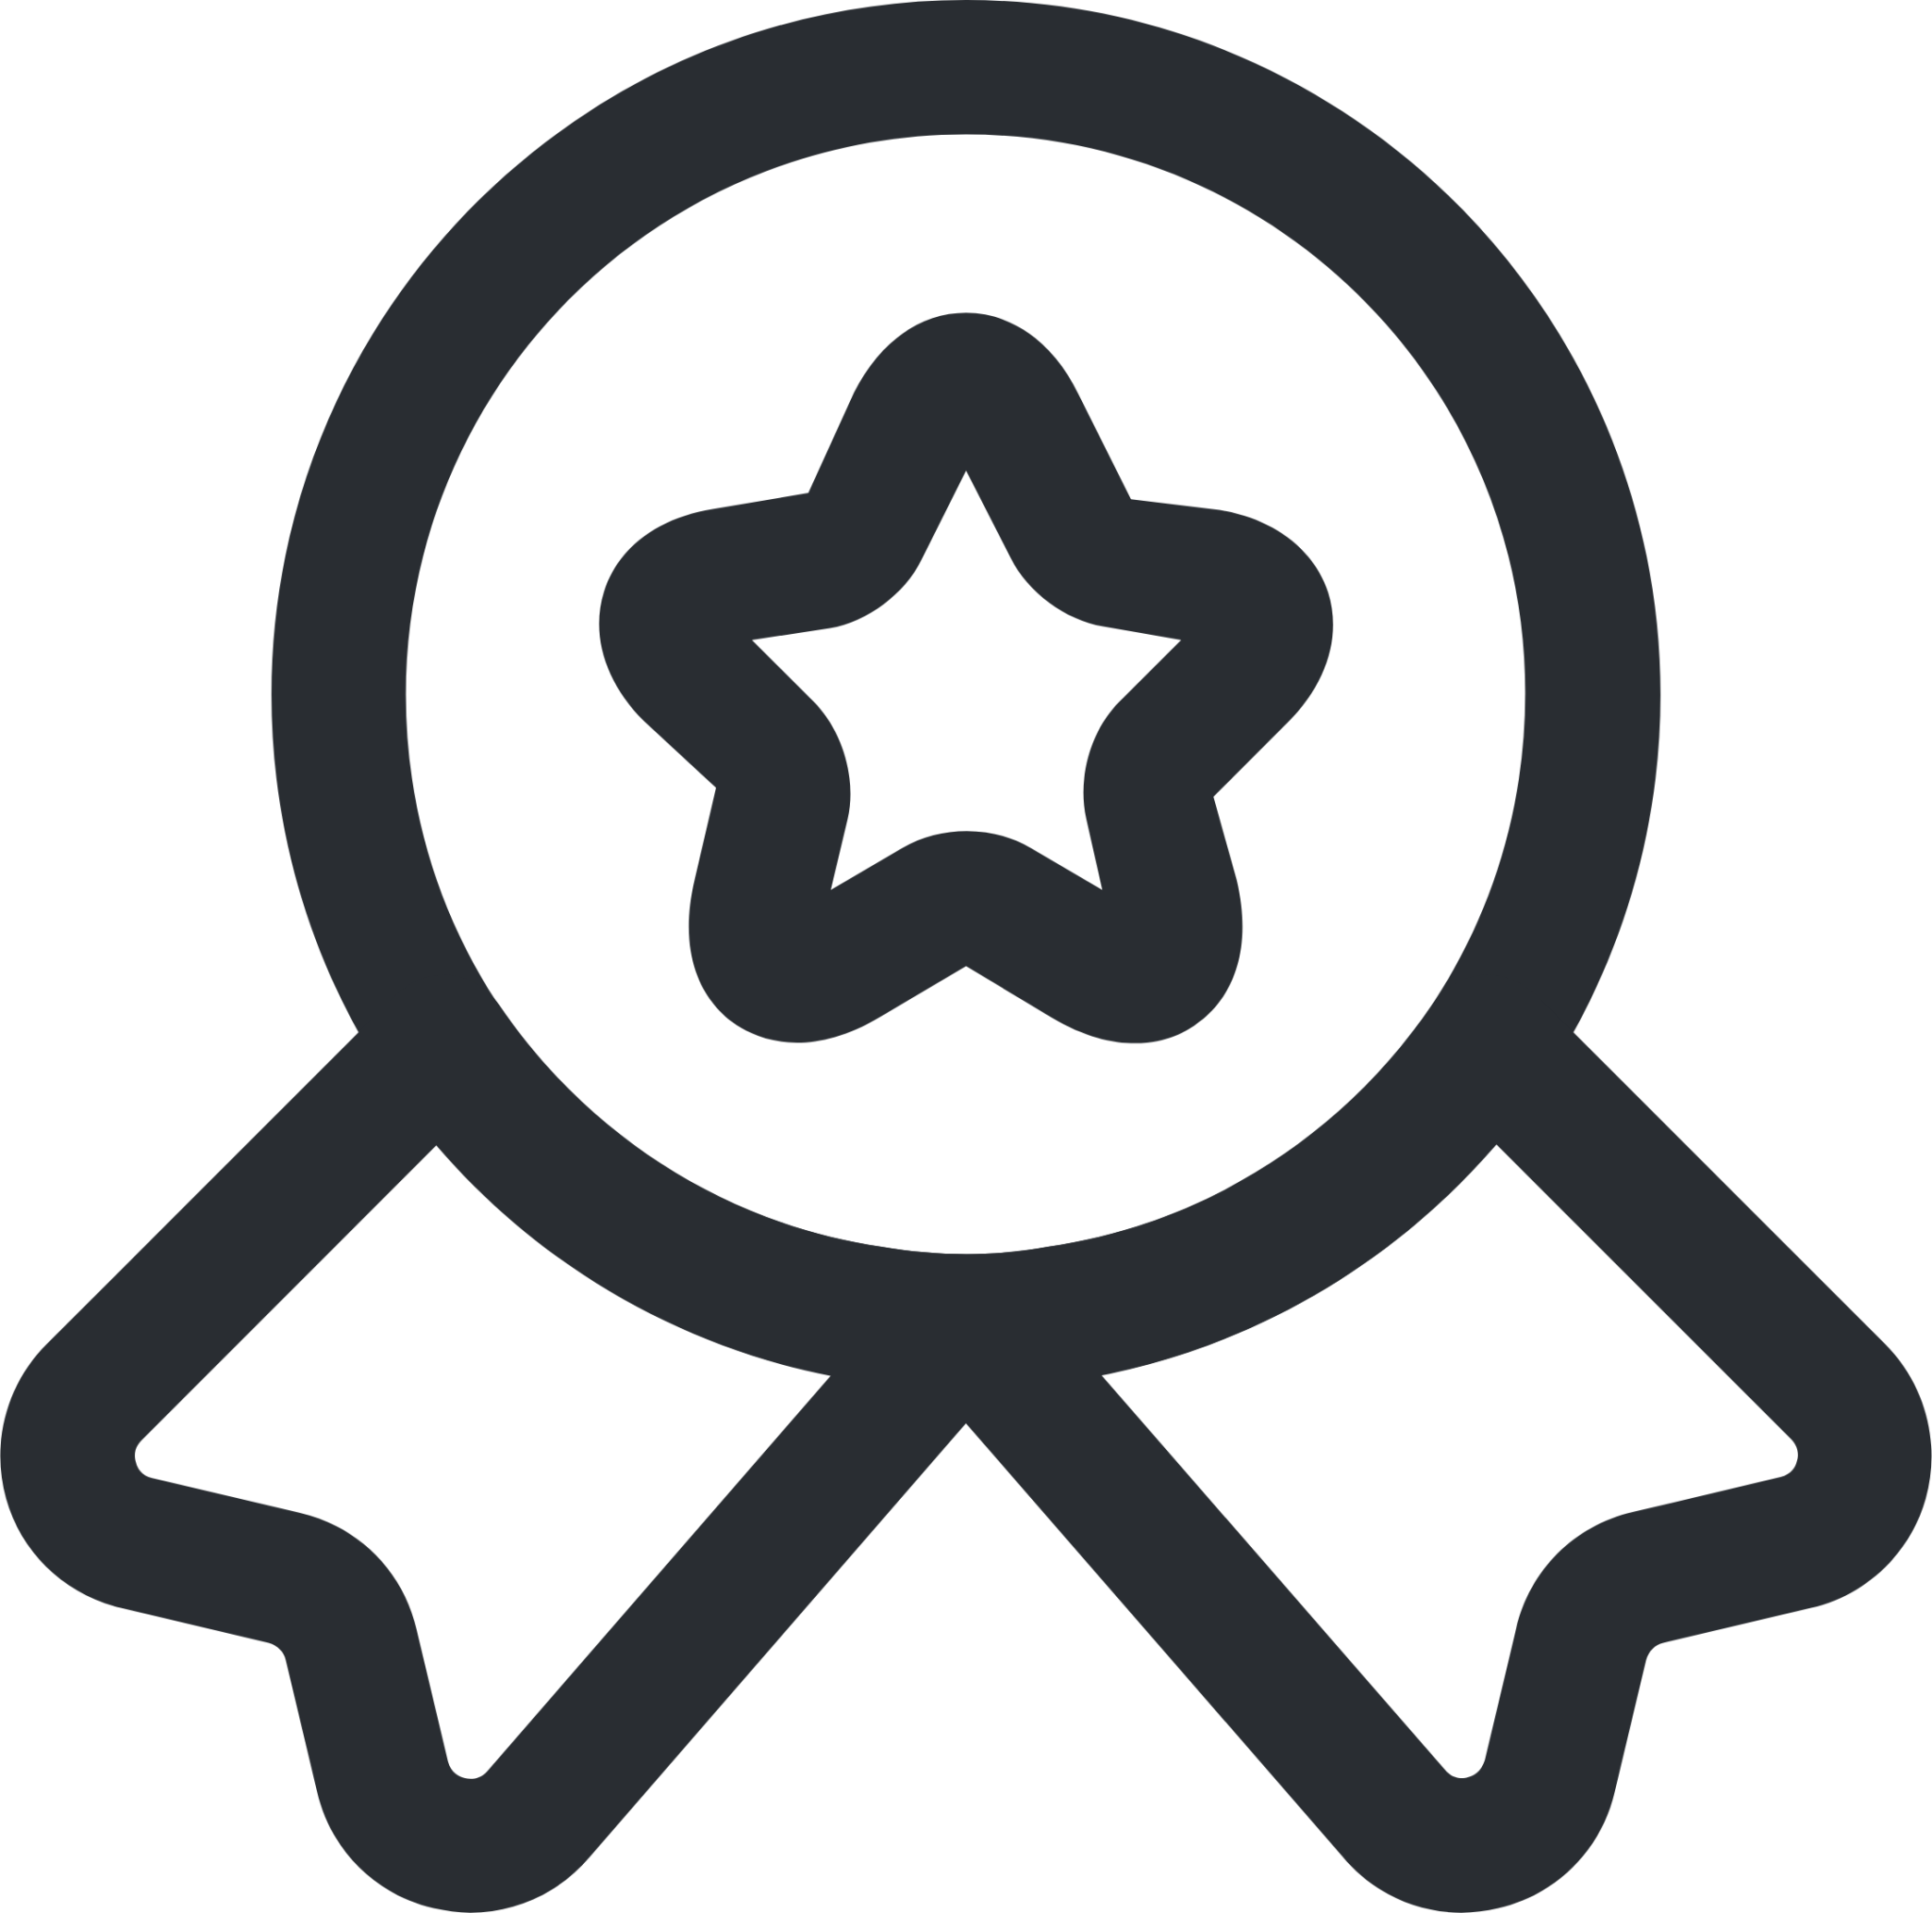 medal star icon